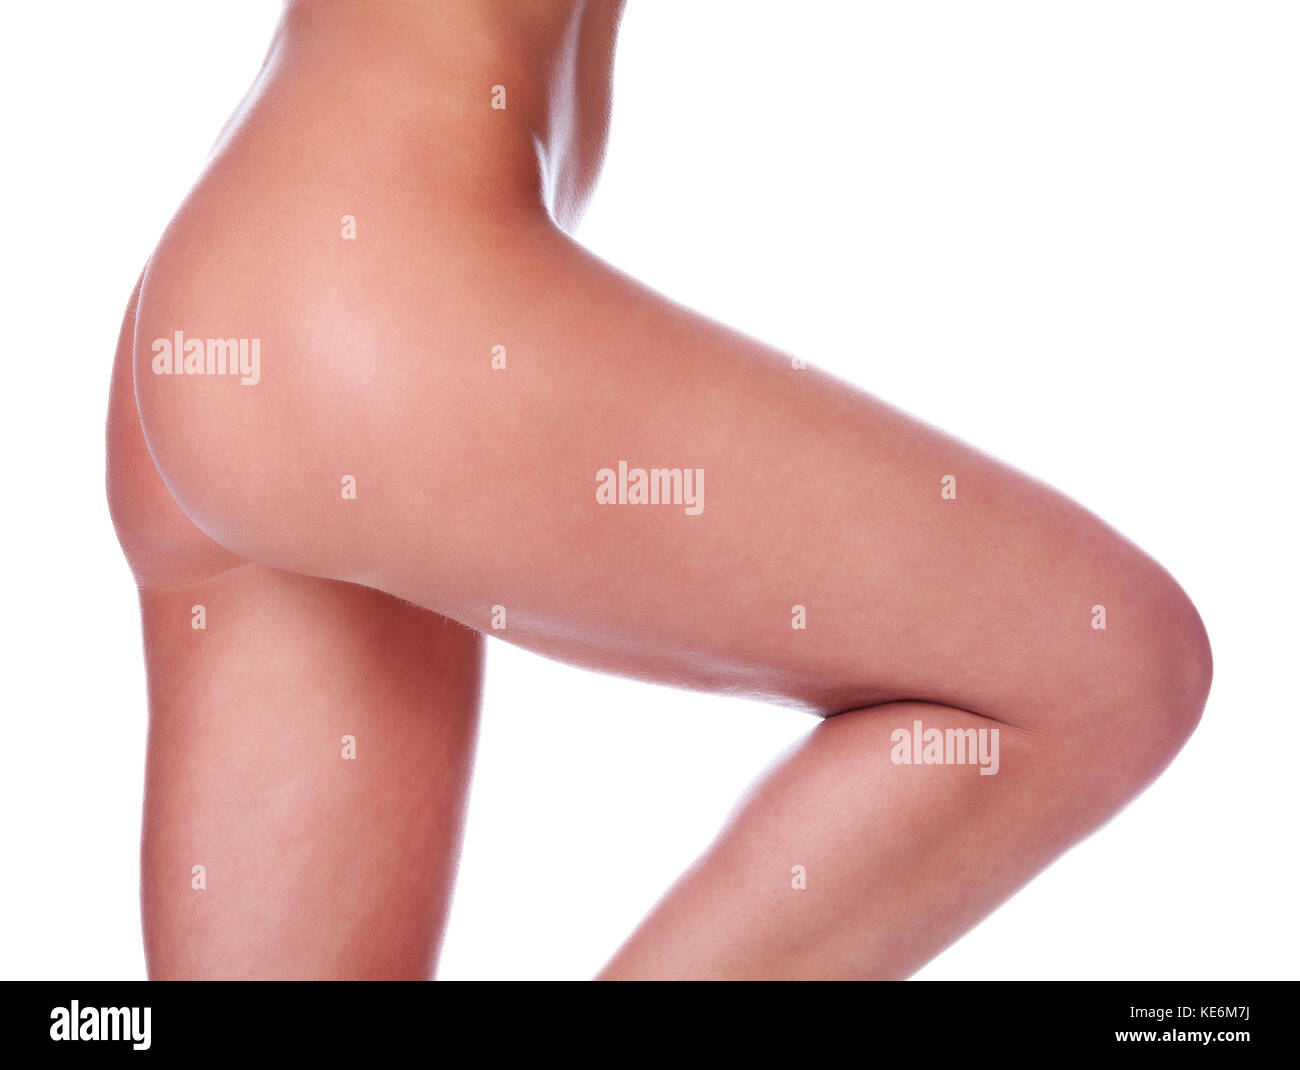 Naked female body with clean and smooth skin, isolated on white background Stock Photo